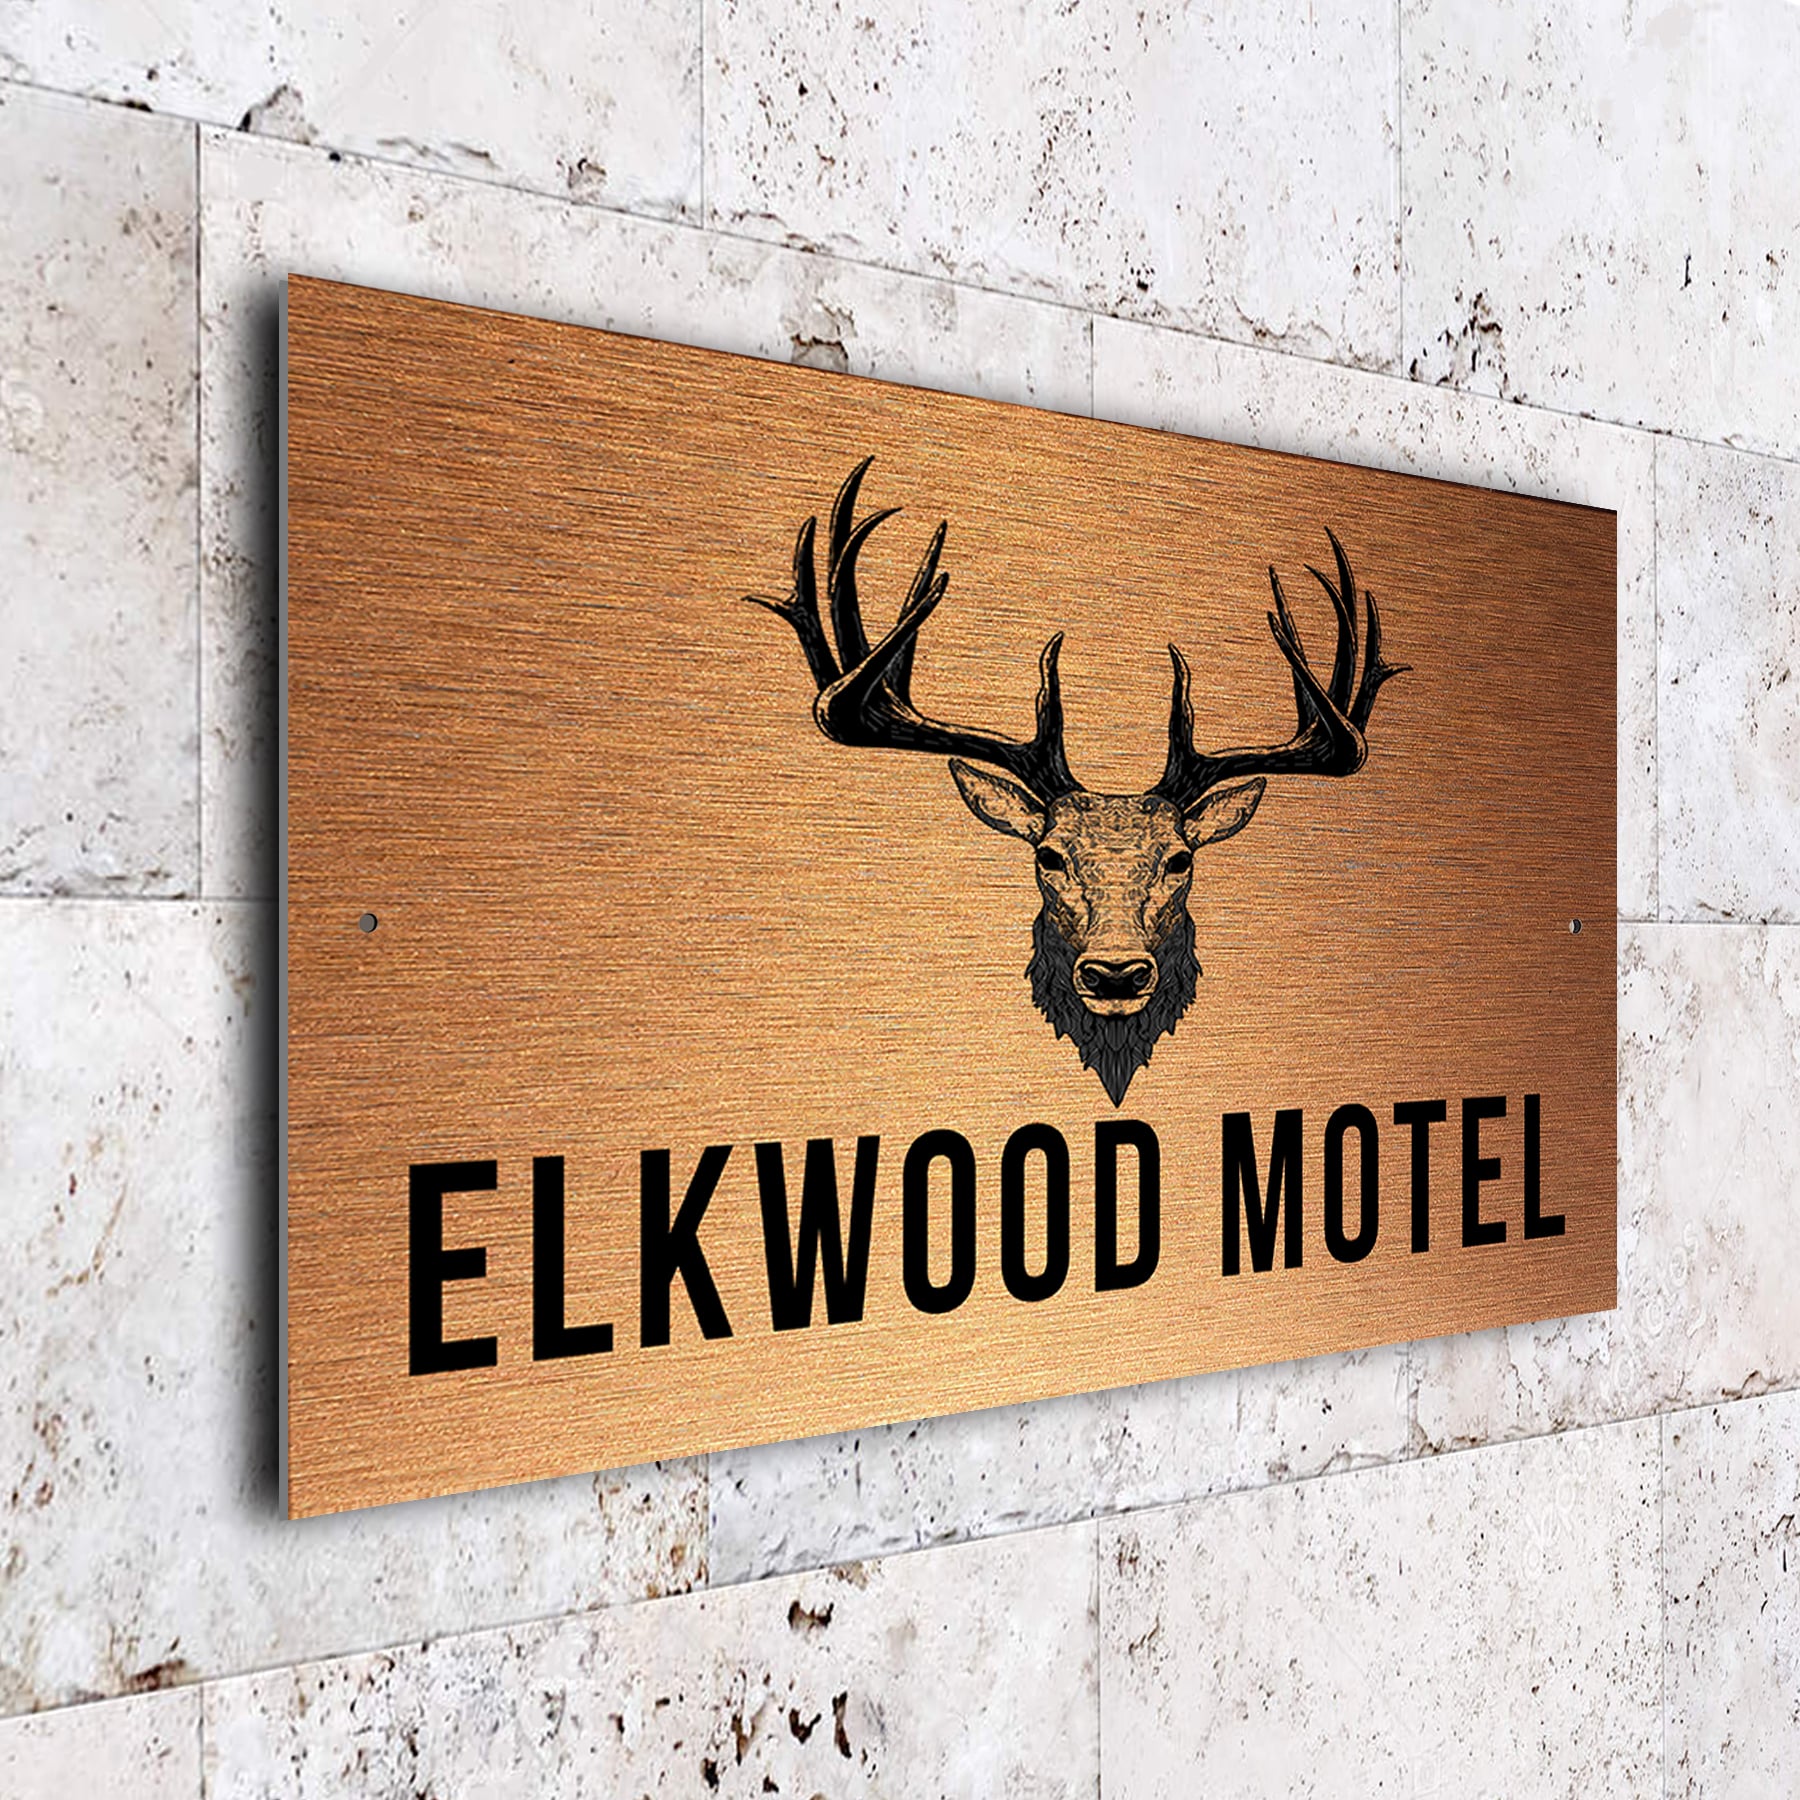 Personalized Motel sign